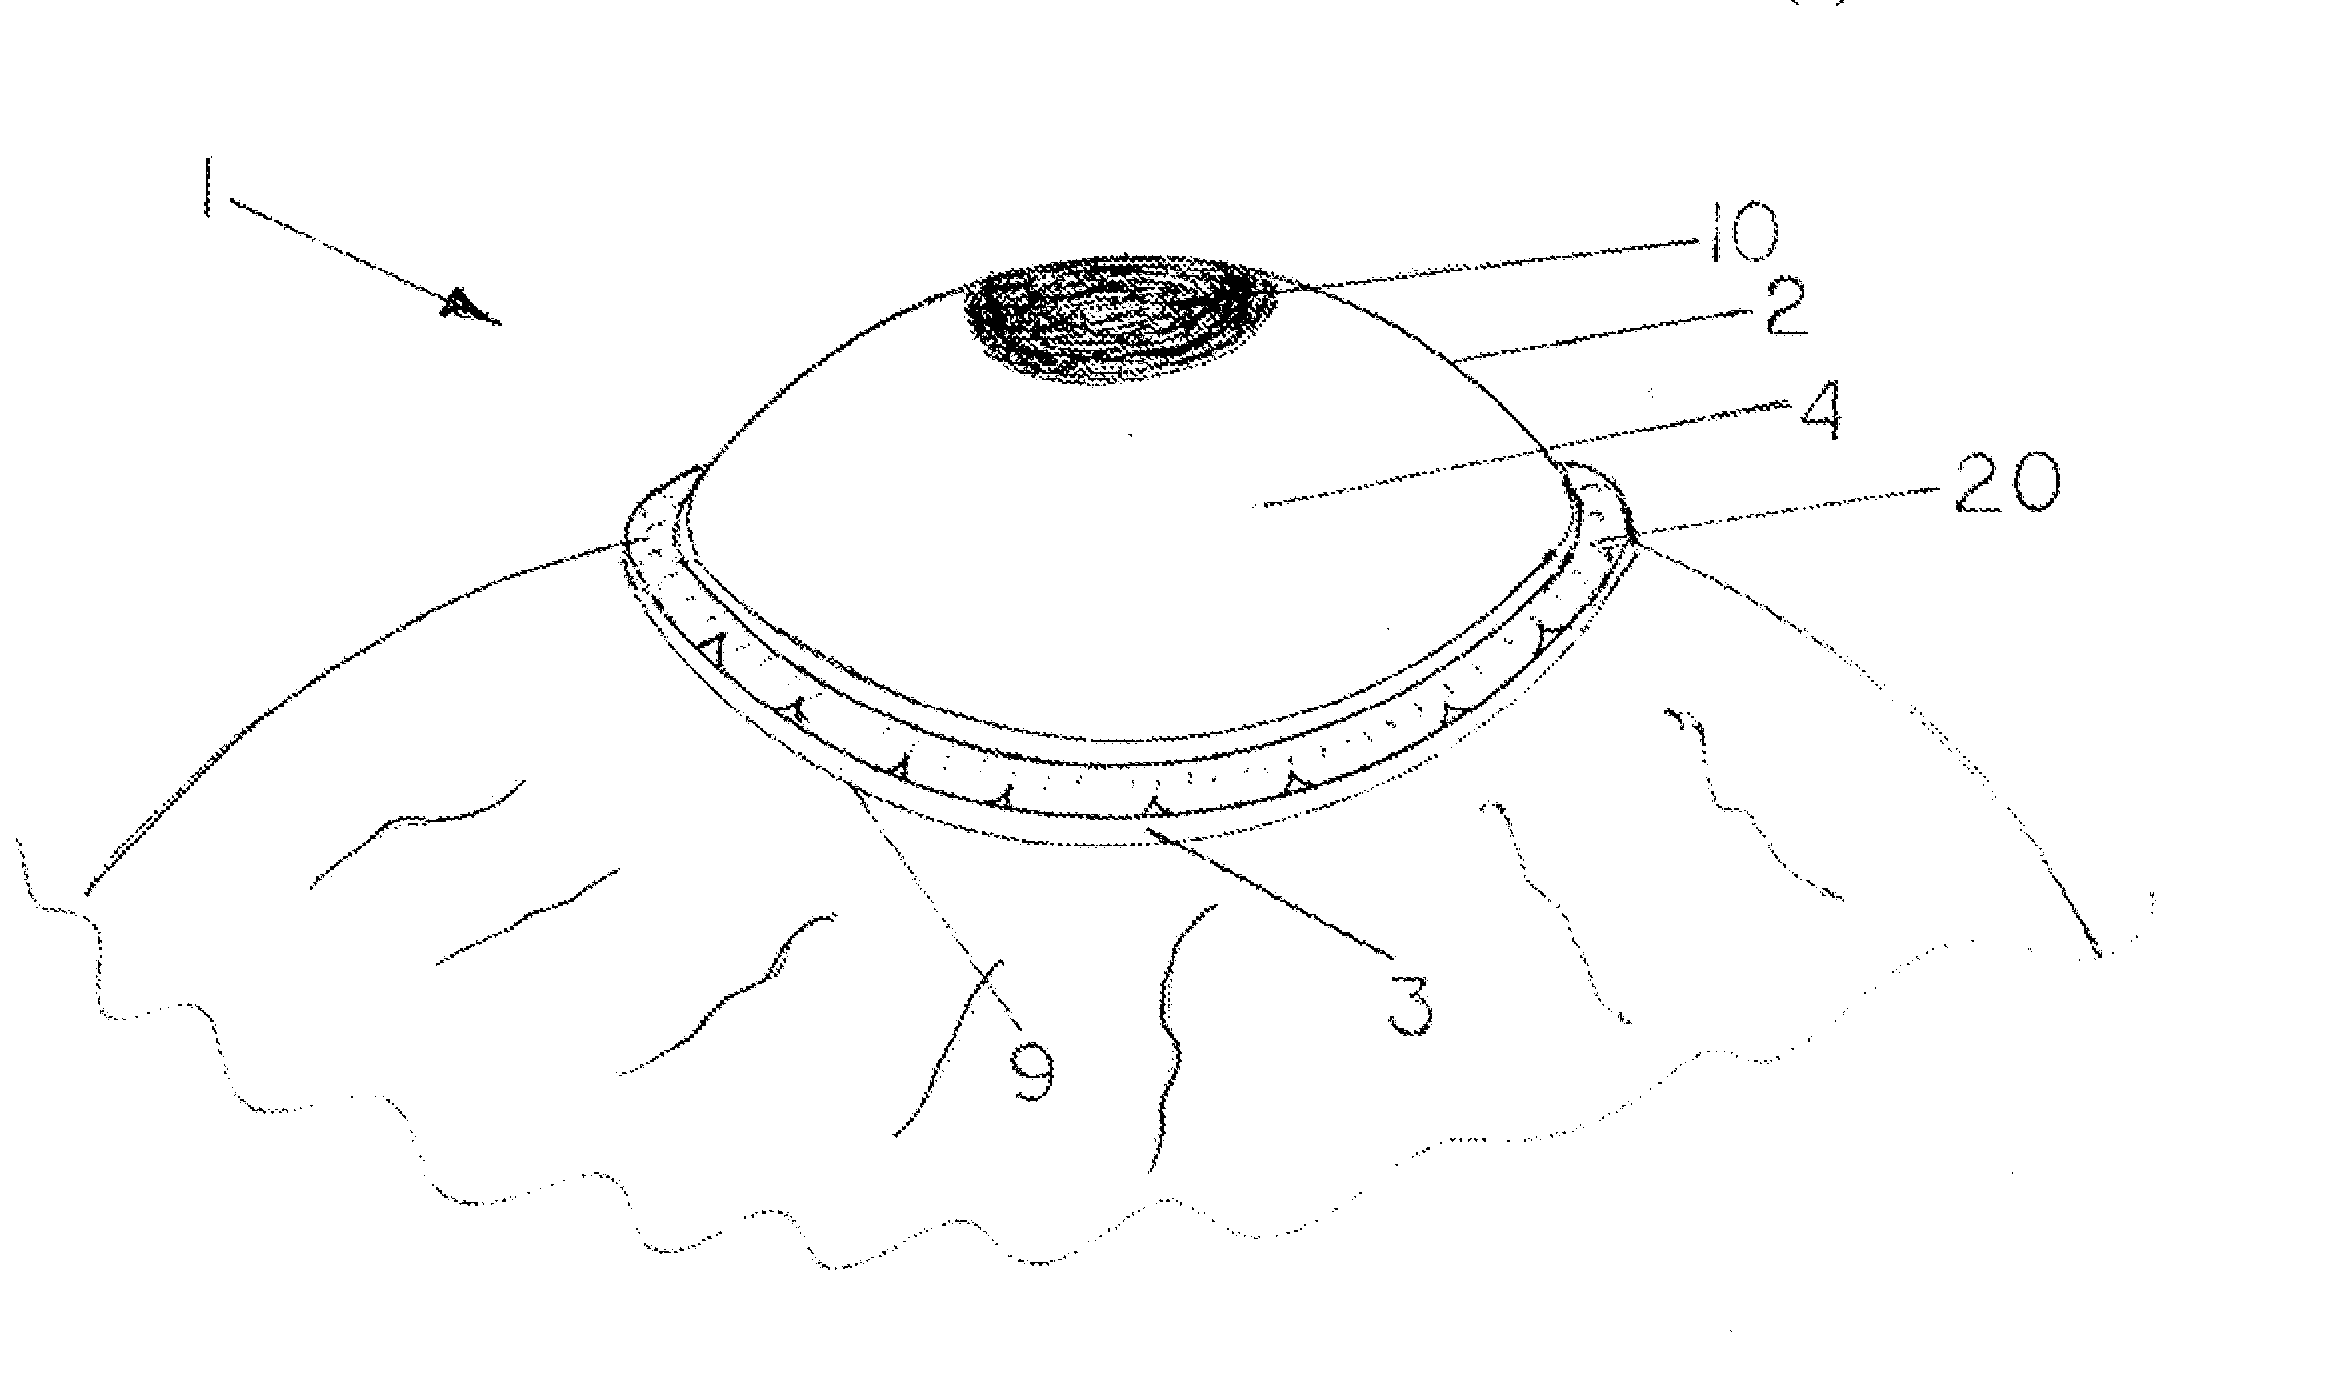 System and Device for Correcting Hyperopia and Presbyopia